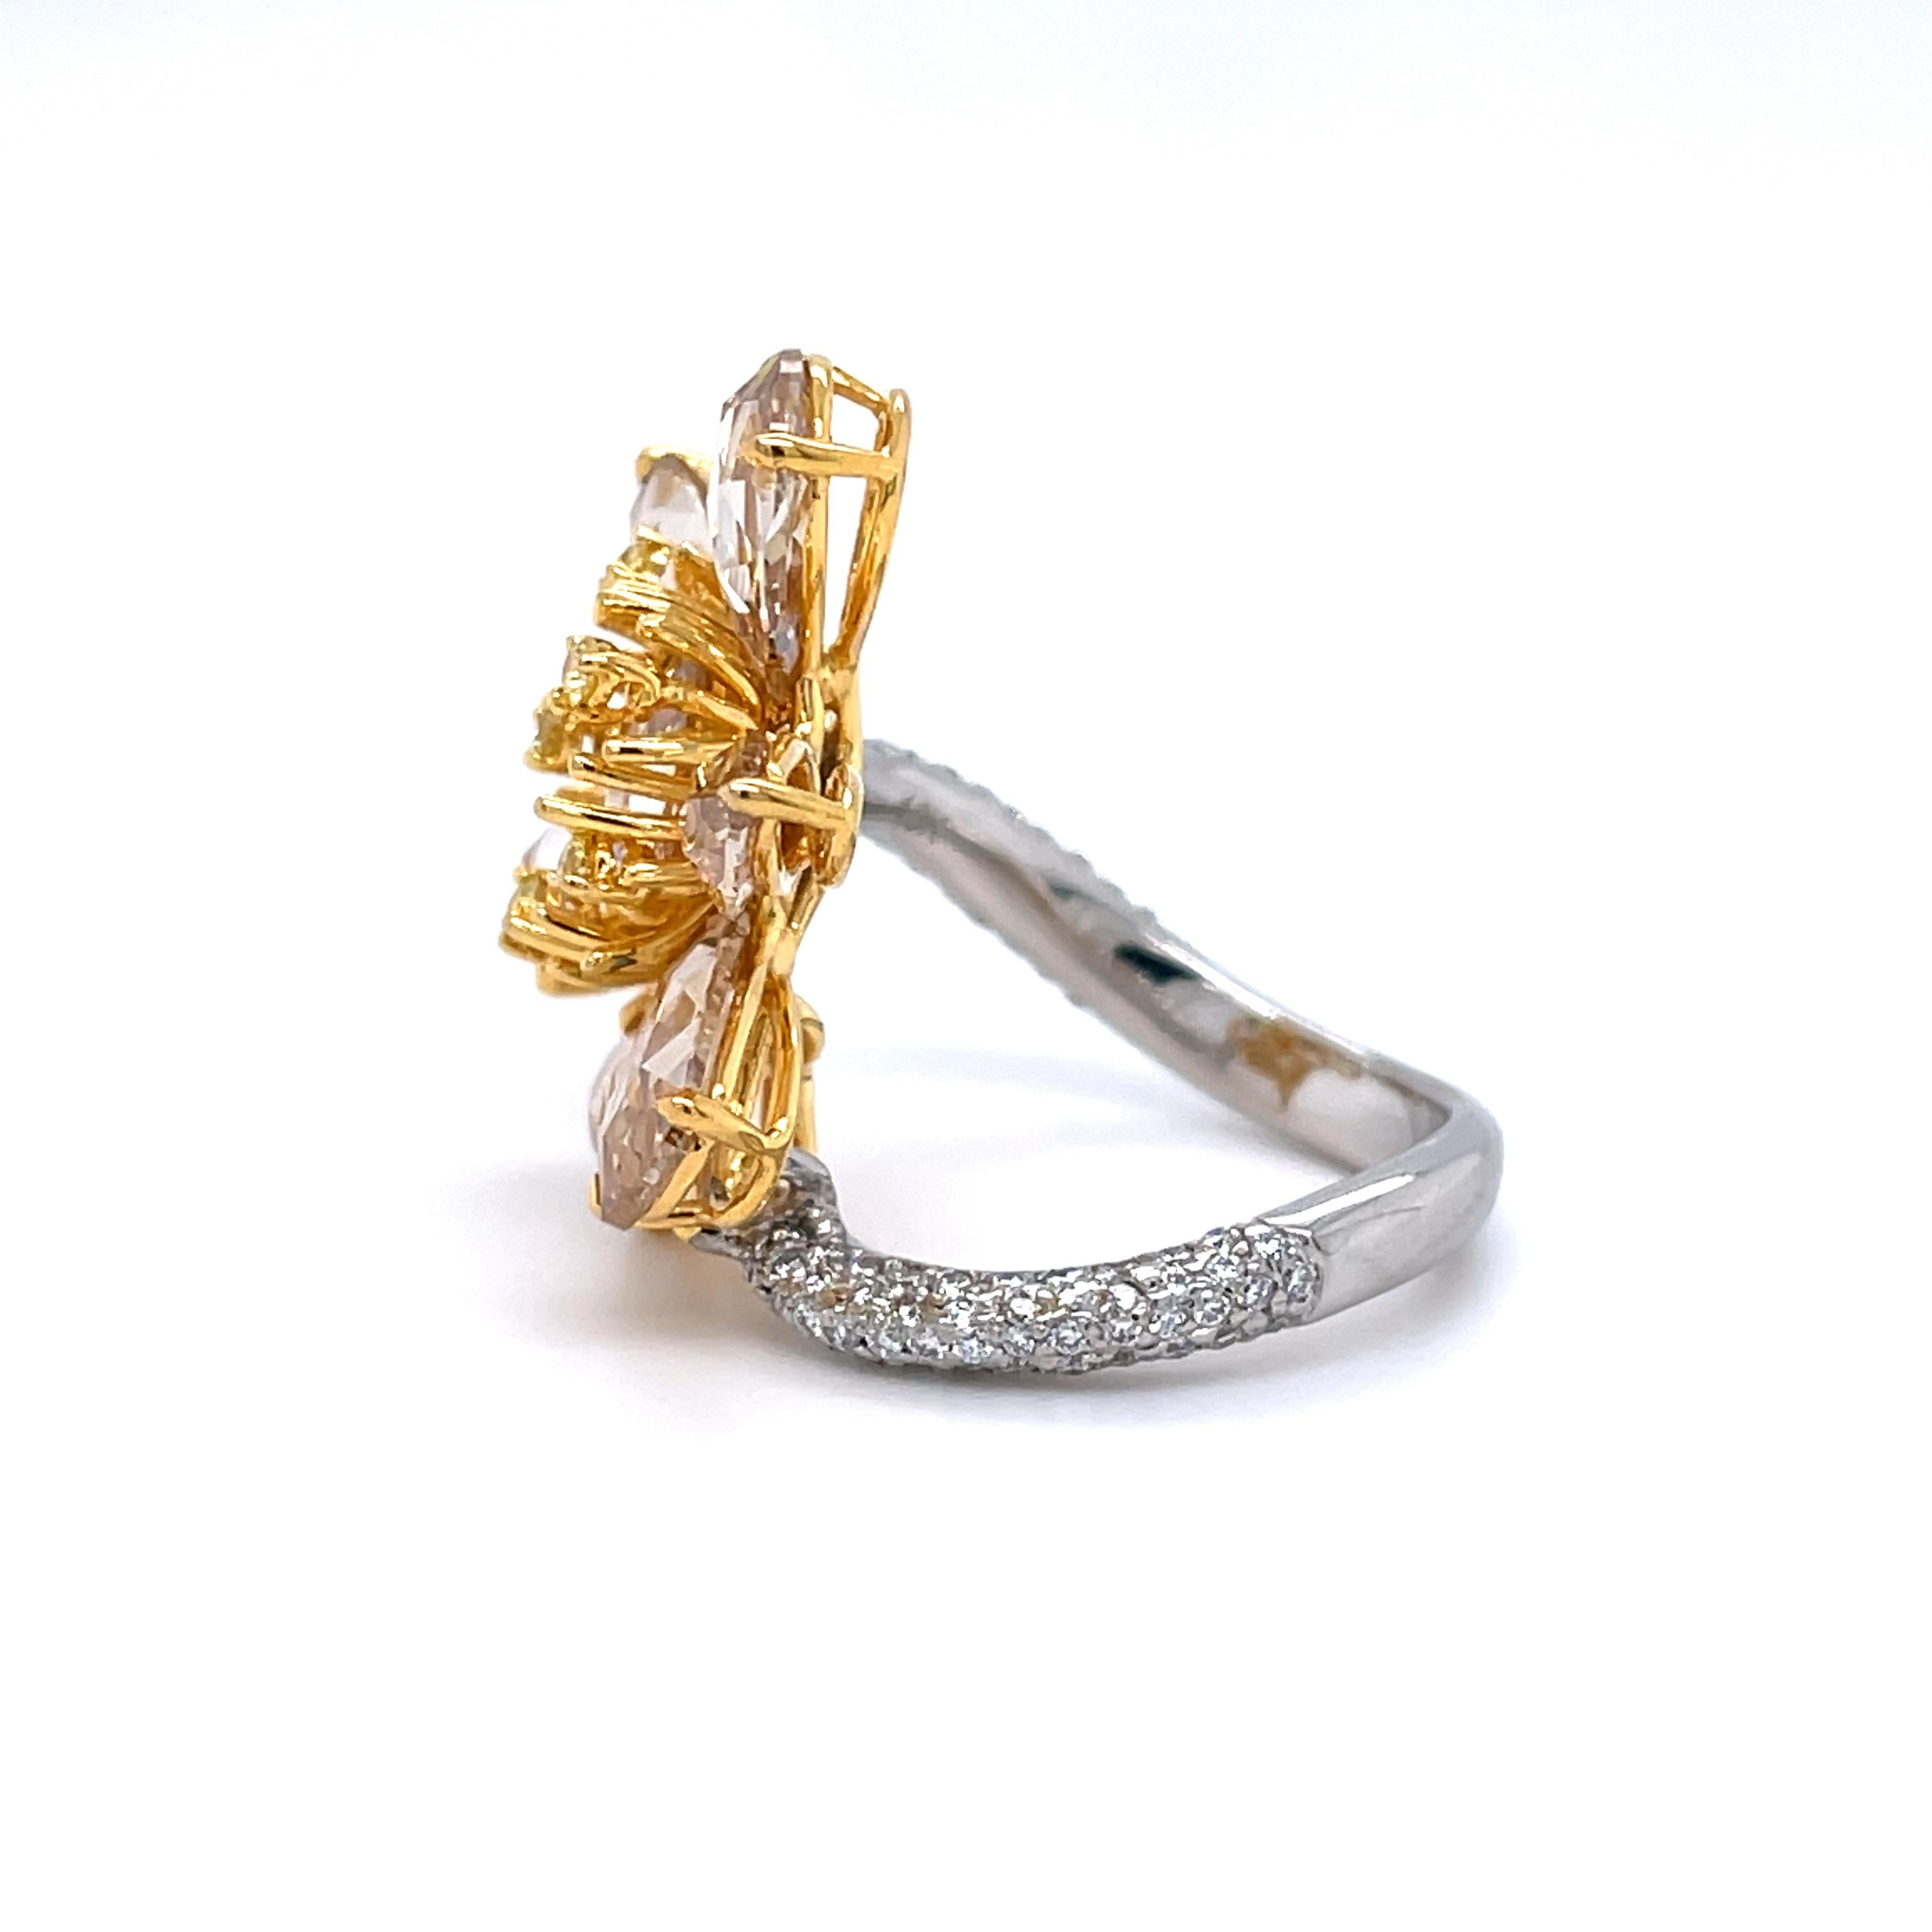 Enchanting Floral Display: Fancy Rose Cut Diamond Cocktail Ring in 18k Gold

This captivating cocktail ring features a breathtaking display of fancy rose cut diamonds, boasting a total carat weight of approximately 6.29 carats. The rose cut diamonds